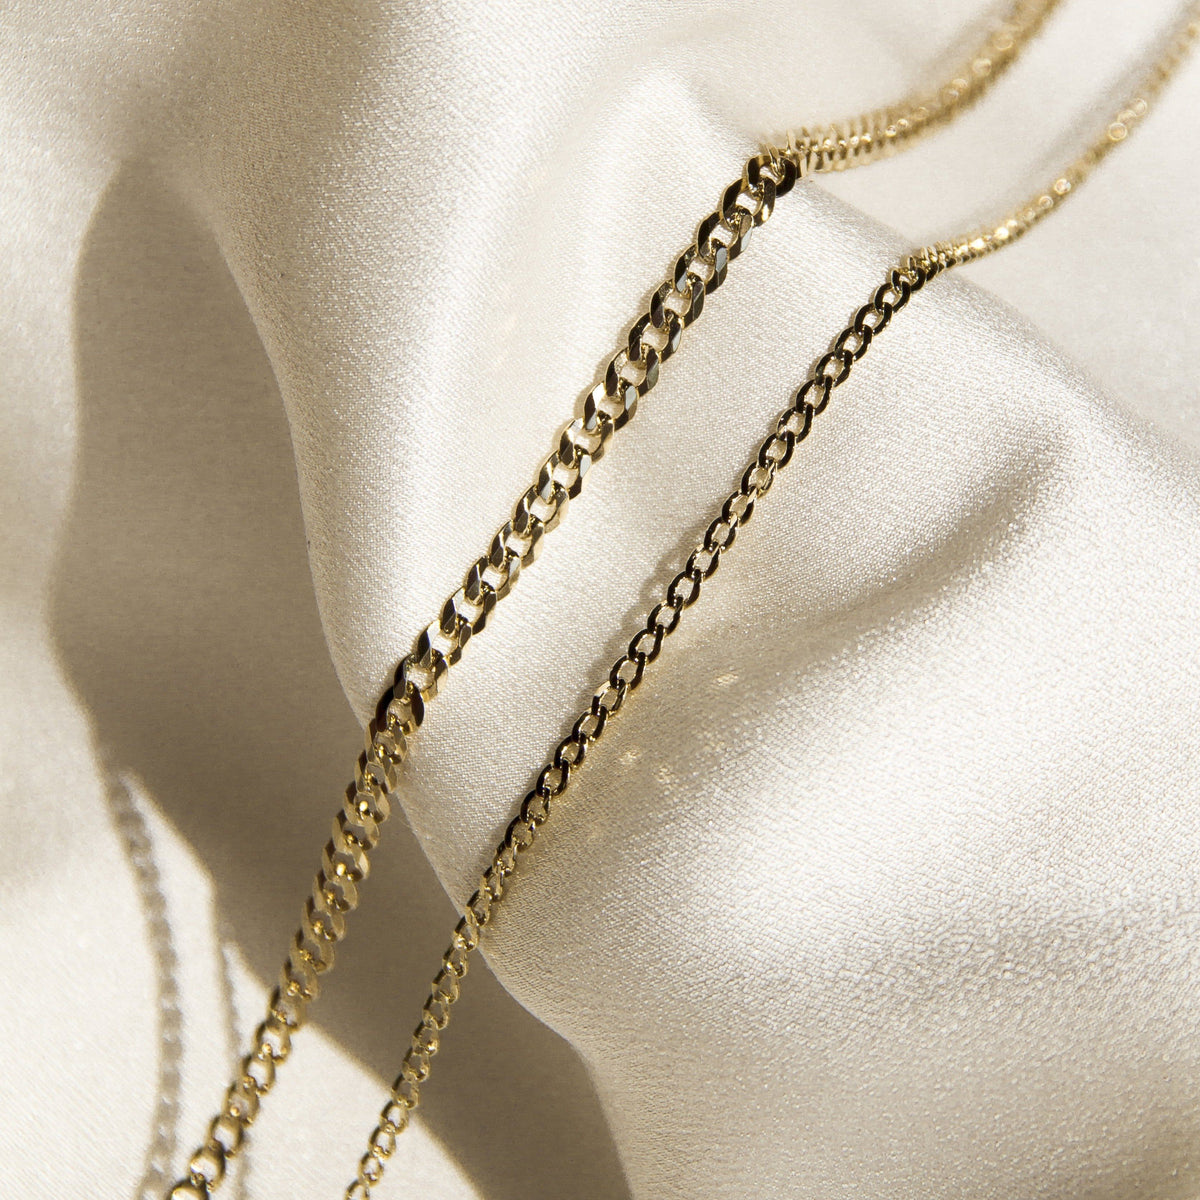 Aurate New York Medium Gold Curb Chain Necklace